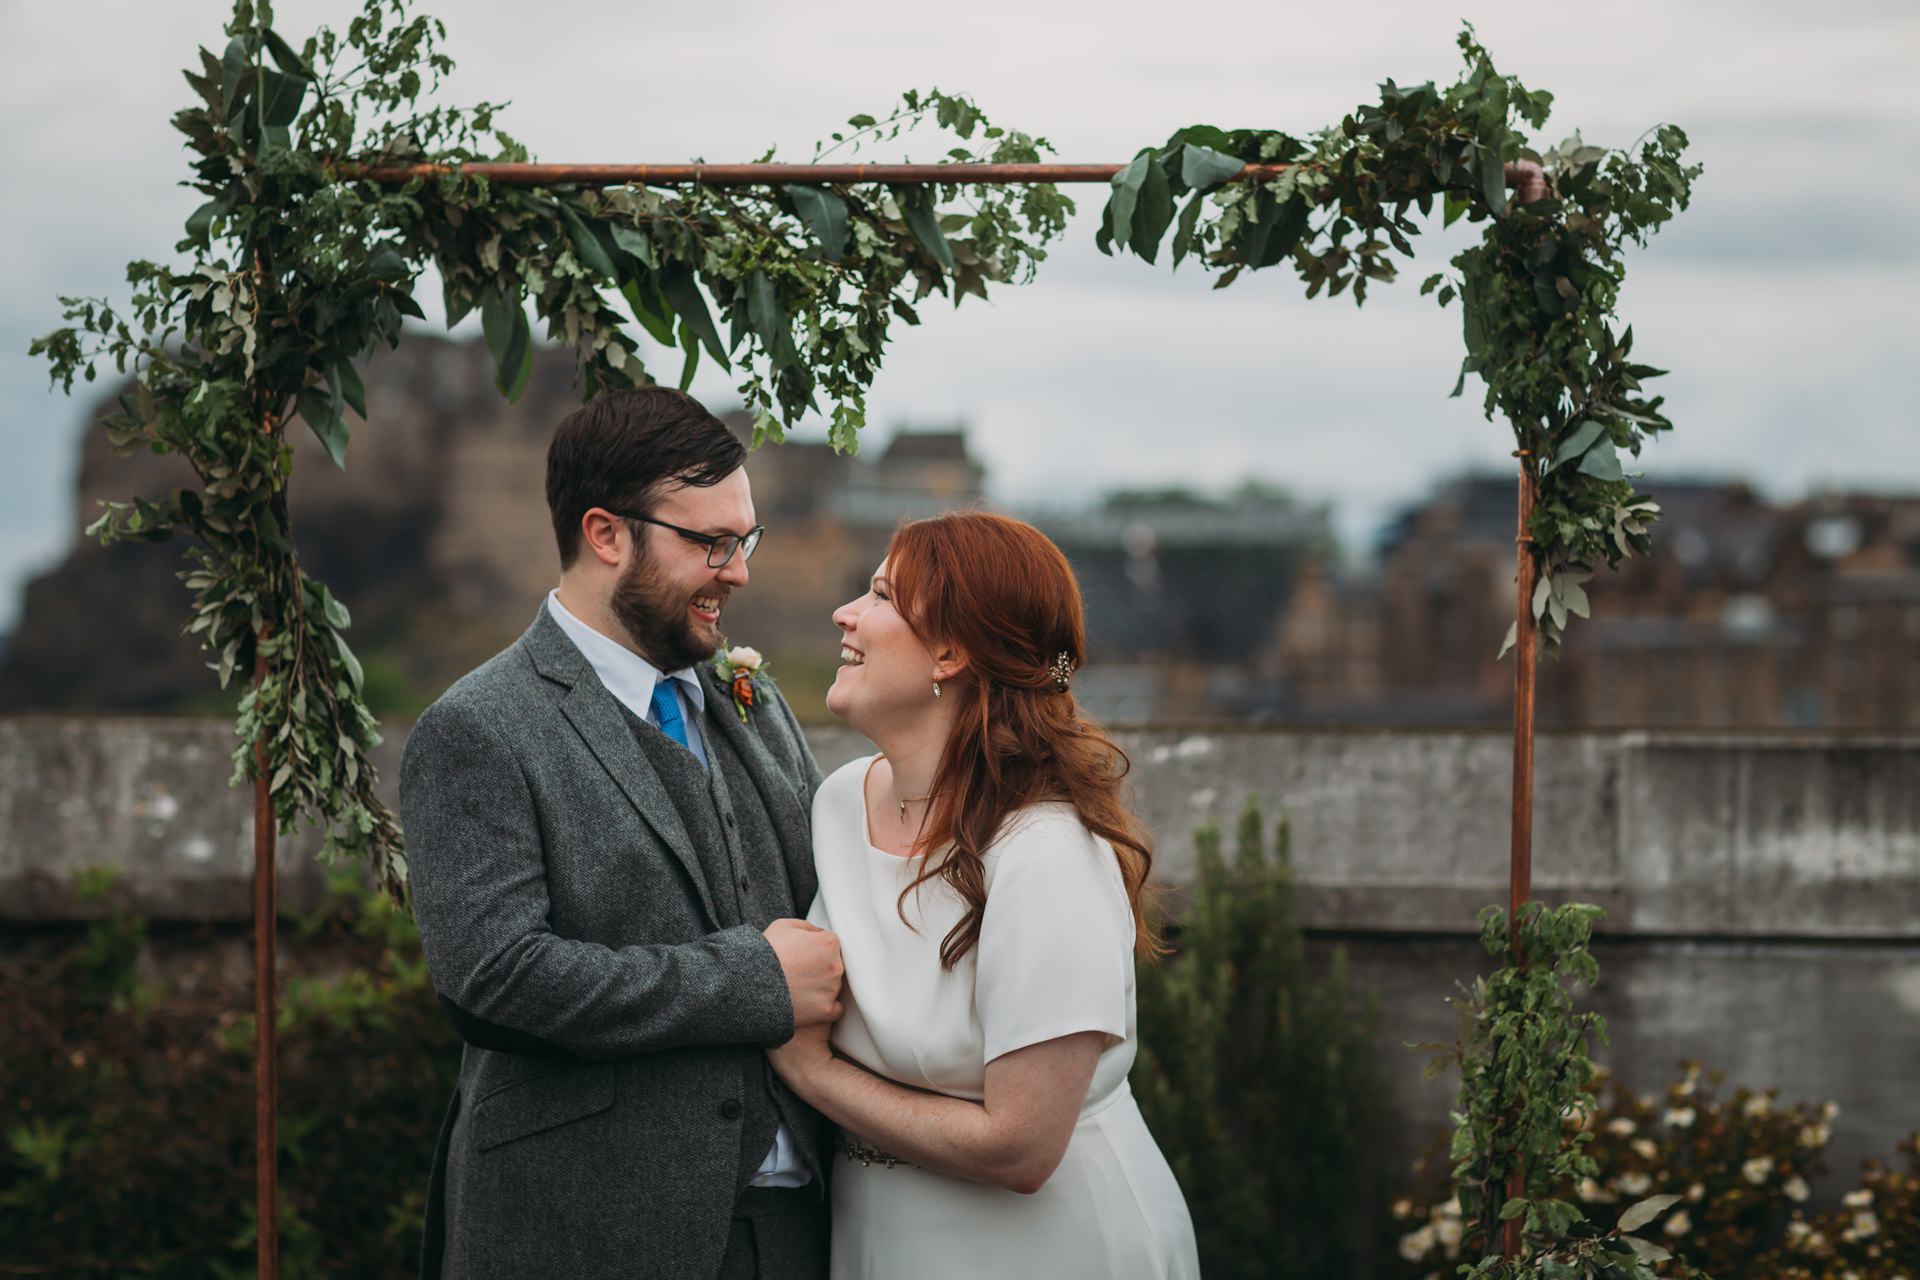 eloping to scotland romantic elopement photography Scotland couple laugh under floral archway in Edinburgh